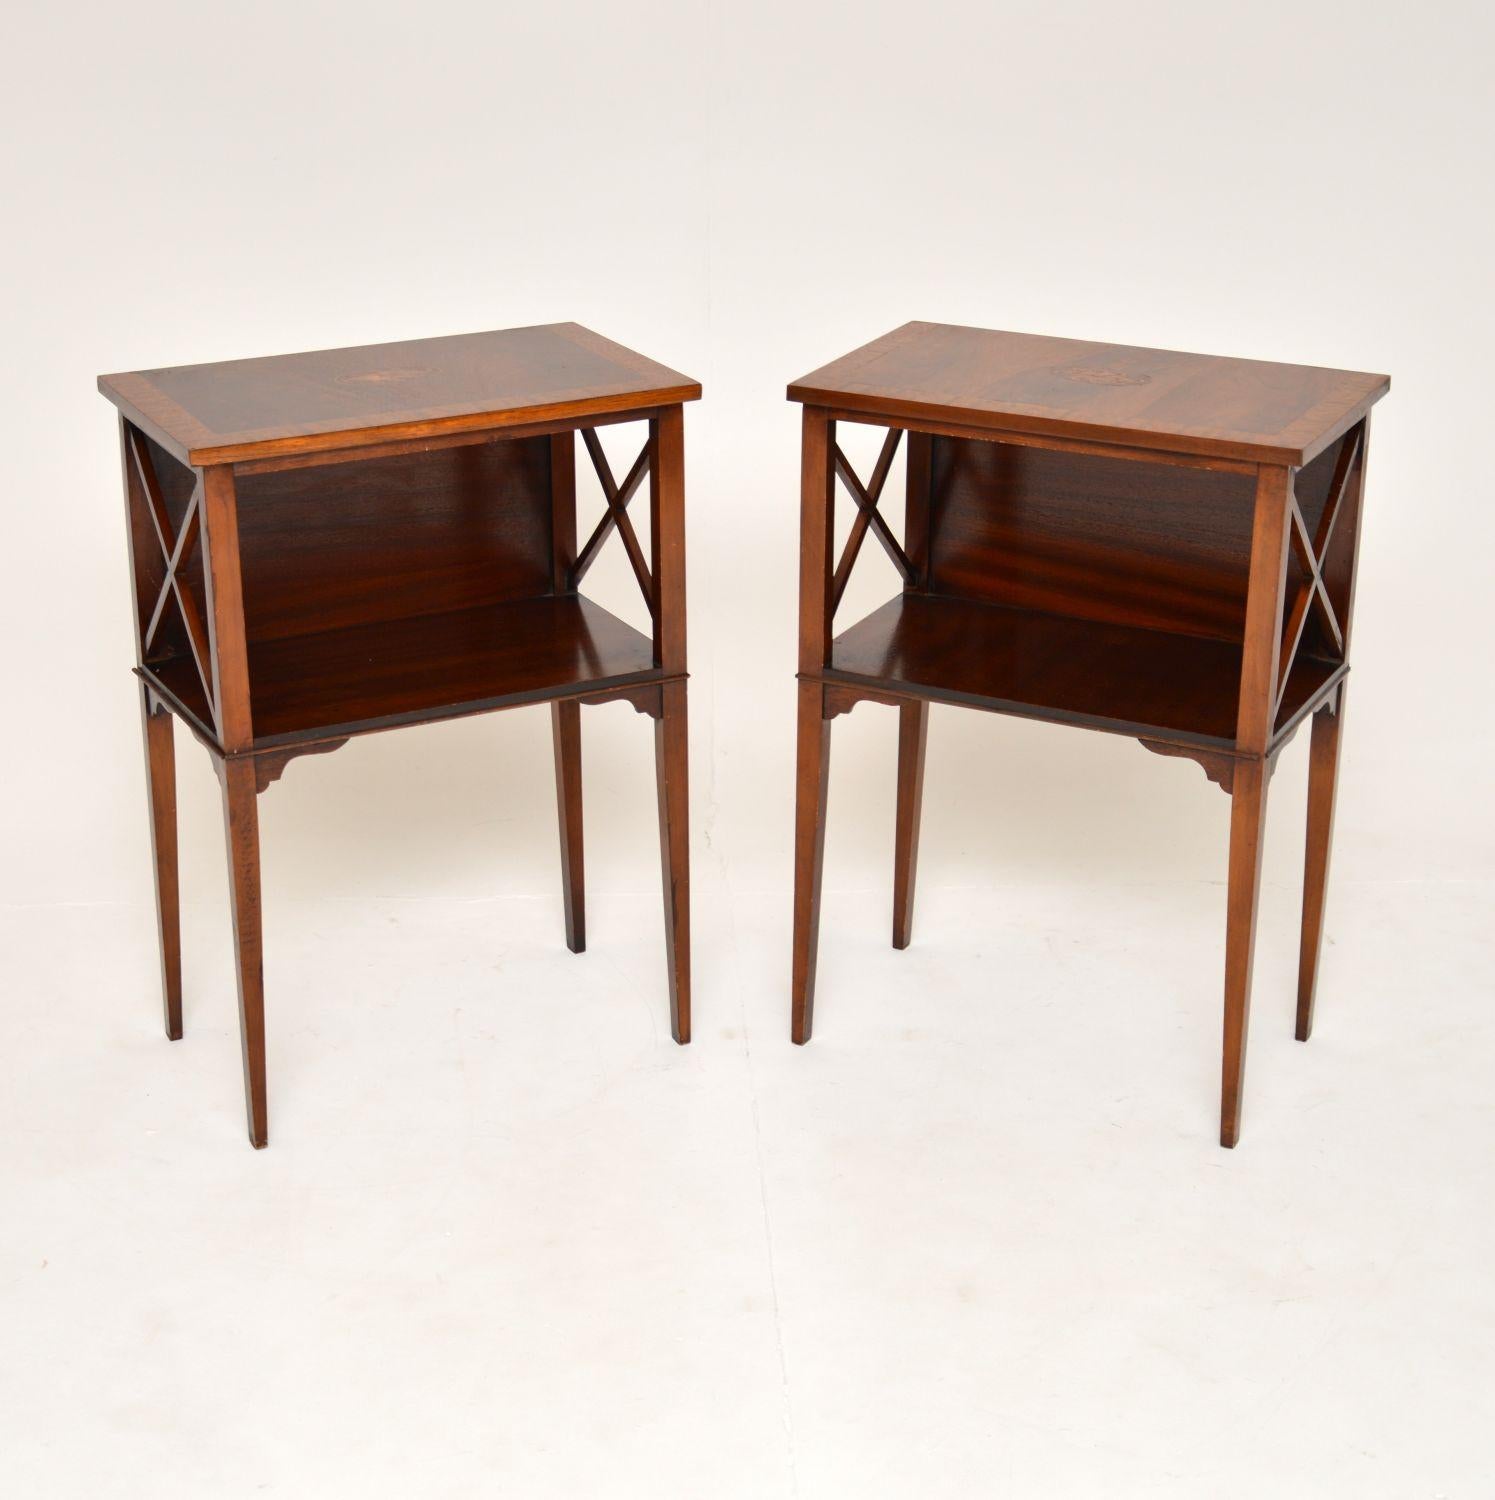 A beautiful and elegant pair of antique inlaid side tables. They are in the classic Sheraton style, they were made in England and date from around the 1930’s.

The quality is excellent and they are a very useful size. The tops are beautifully